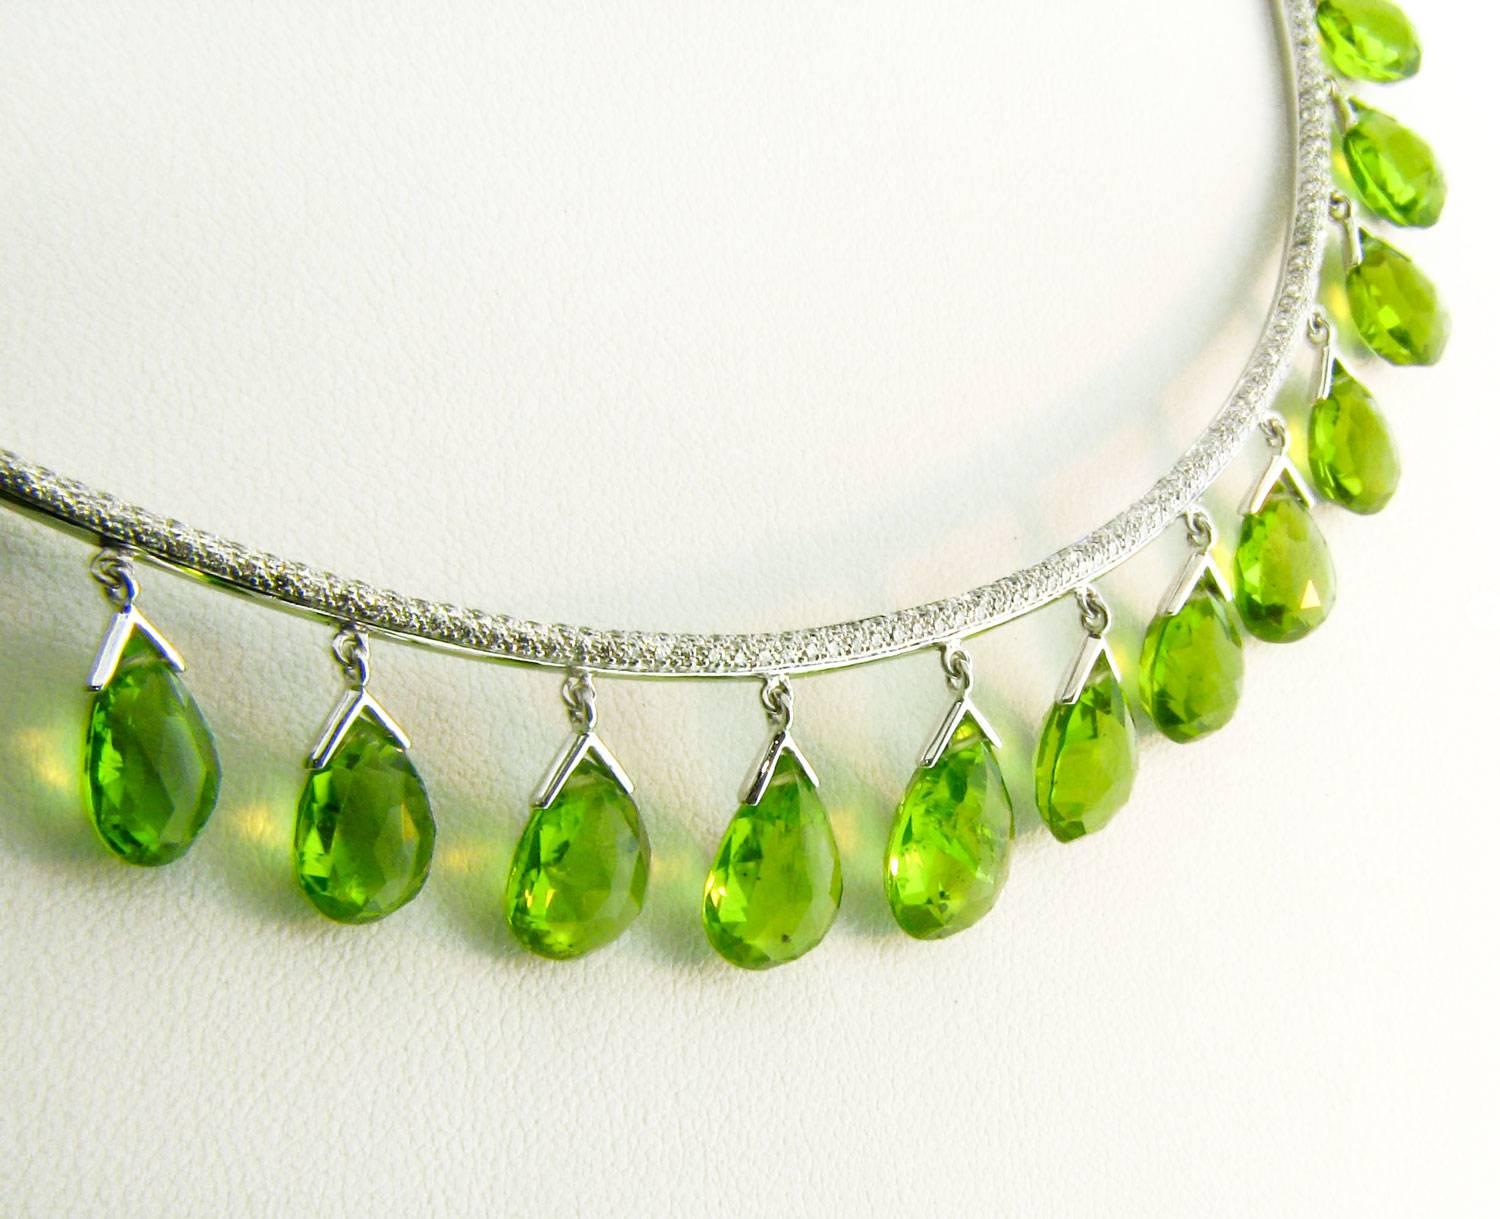 A stunning new collar necklace design by Danuta in 18 kt white gold. 
The top of the collar is intricately set with 2.67 carats of pave white diamonds (FVVS1).
Nearly all the way around this piece dangle elegant Peridot Briolettes totaling 76.48